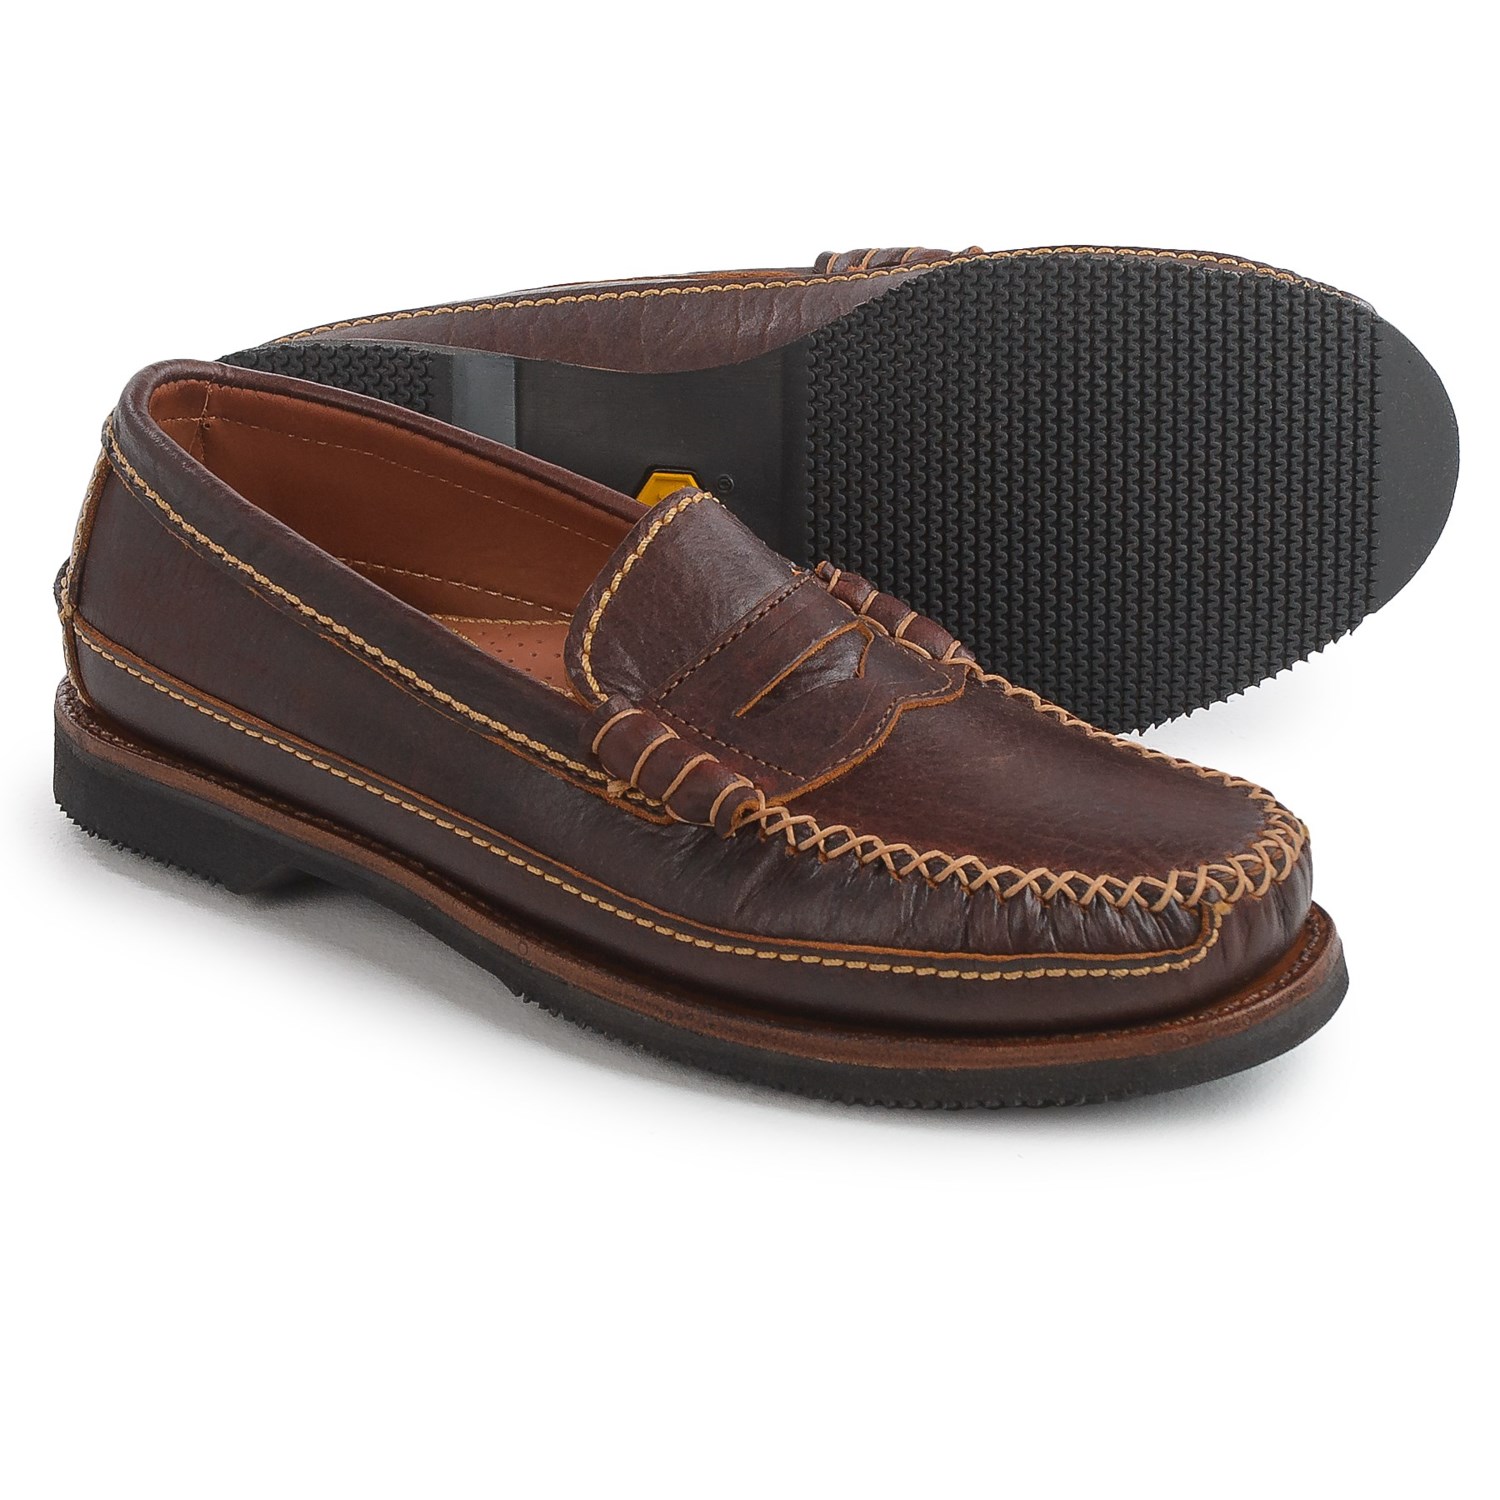 Chippewa American Bison Leather Penny Loafers (For Men) - Save 55%